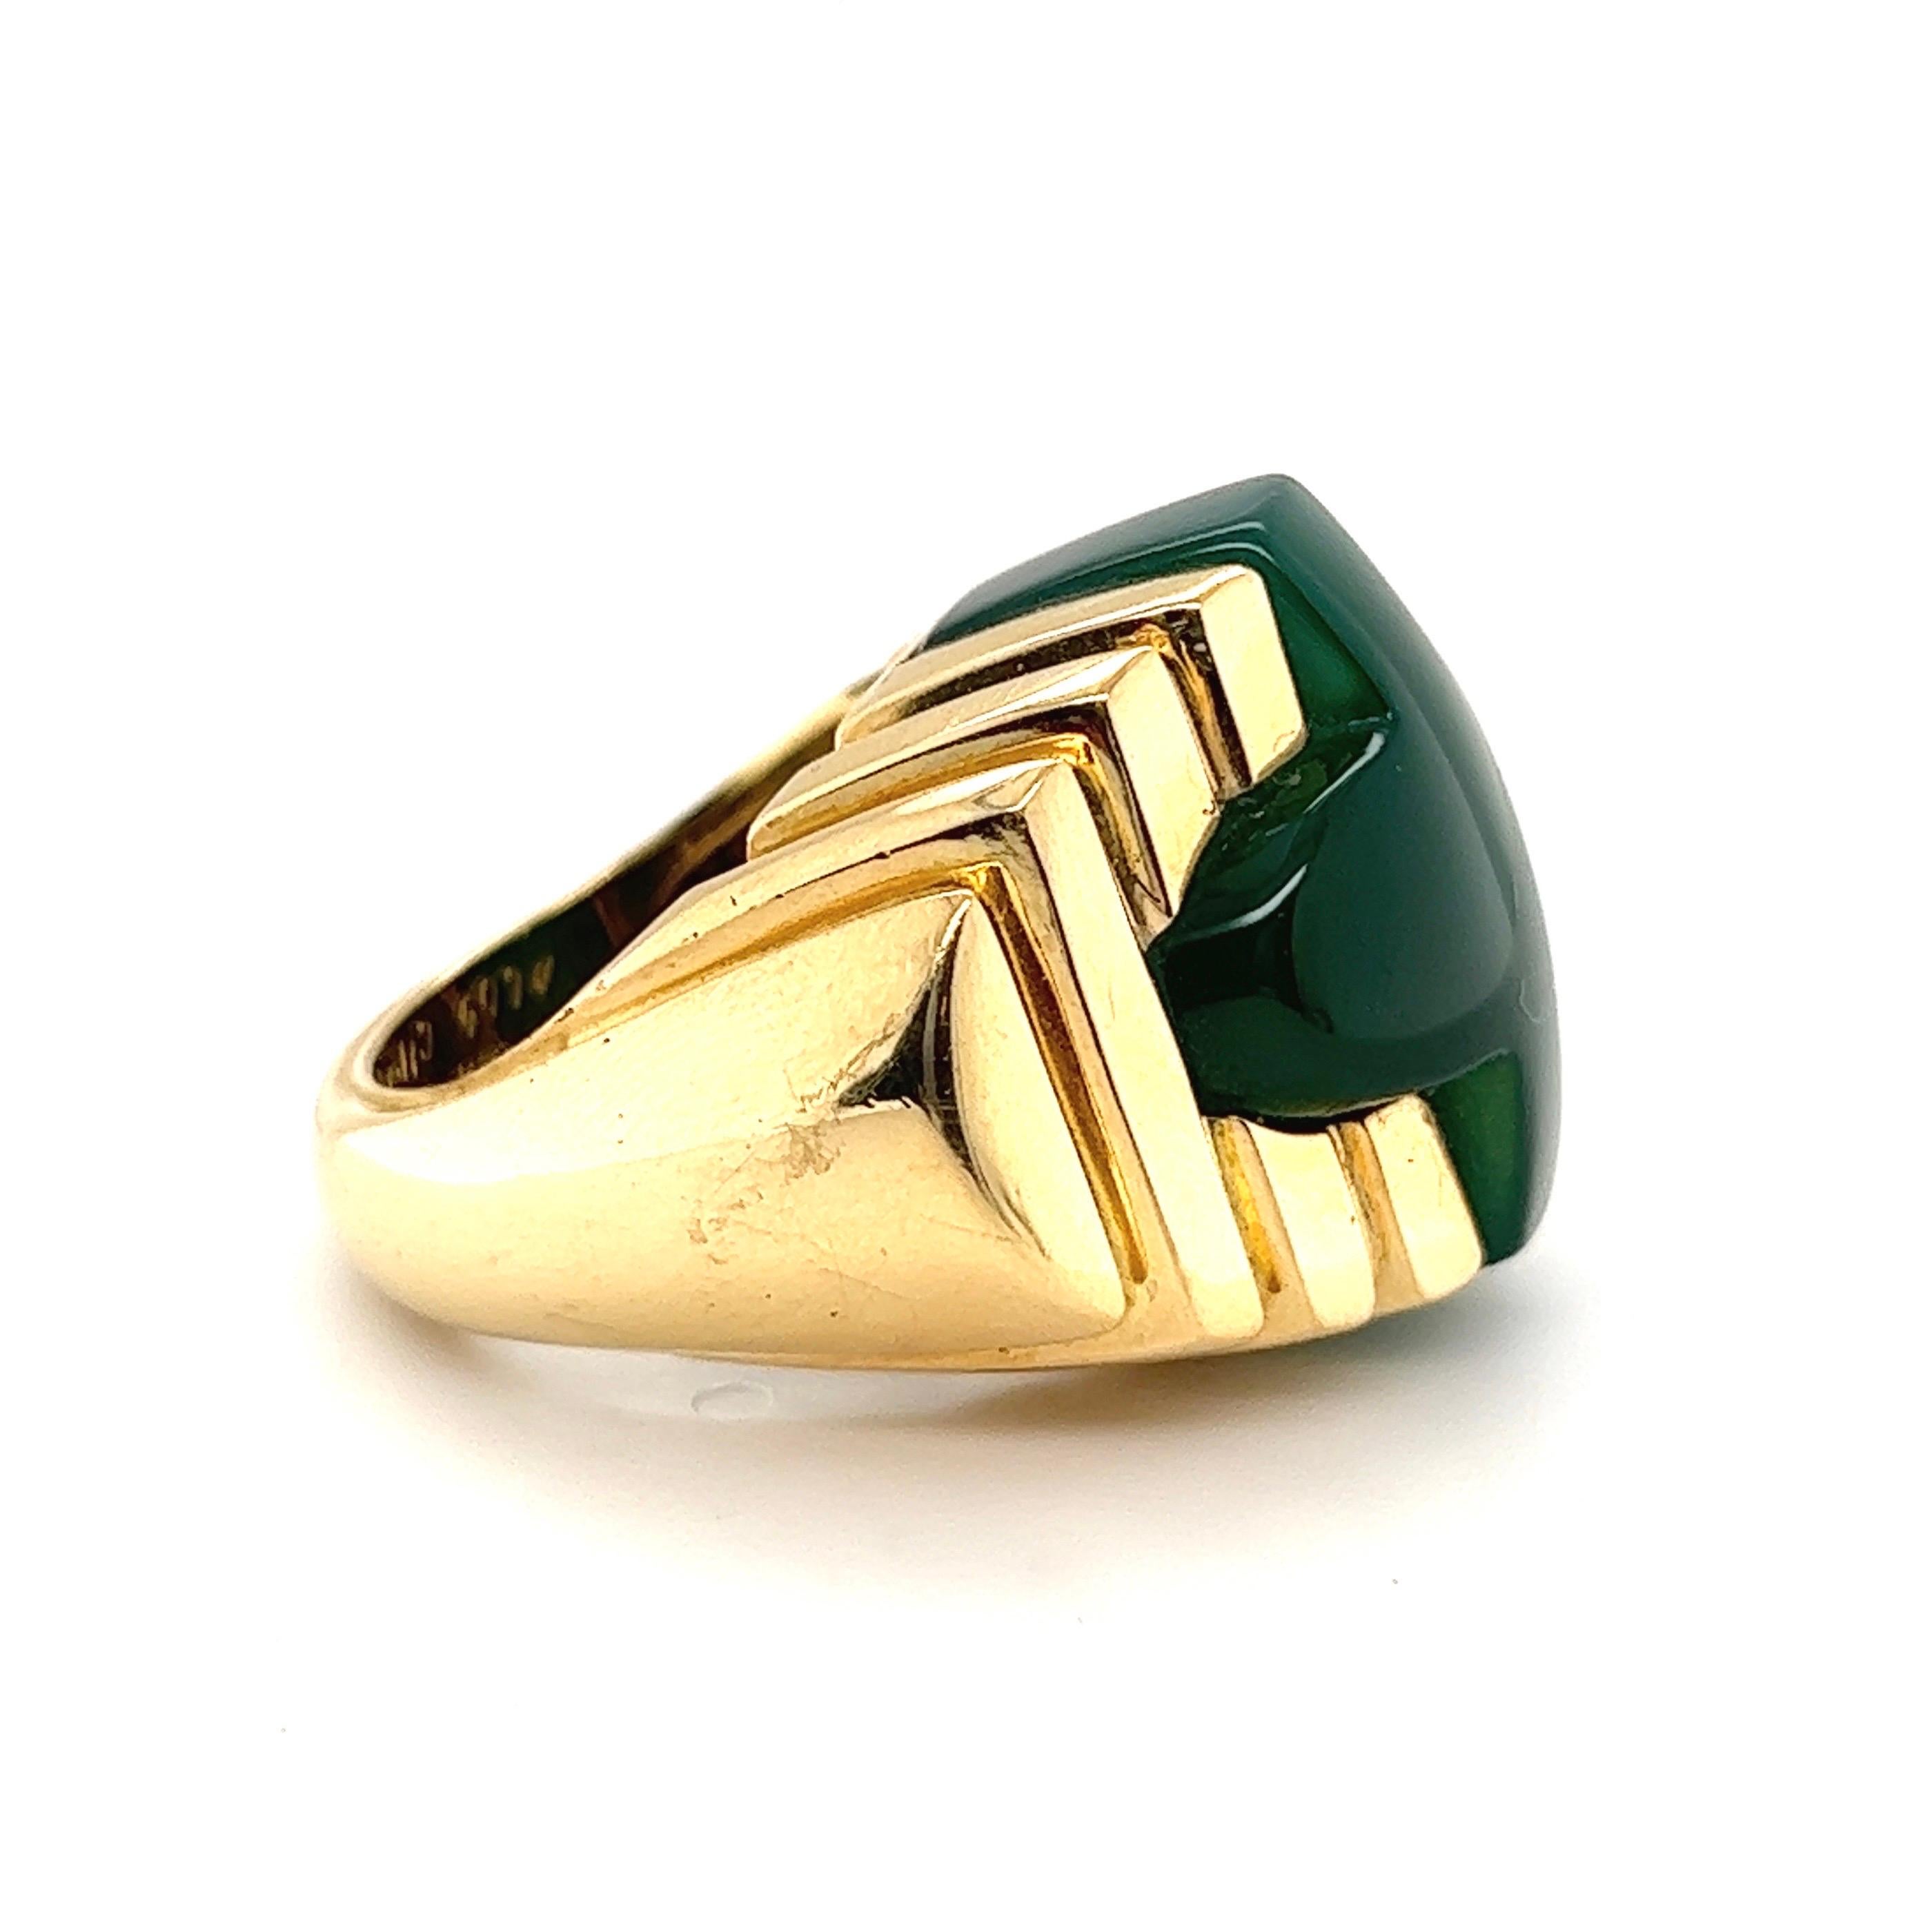 Modernist Cartier Aldo Cipullo 18 Karat Yellow Gold and Green Agate Cocktail Ring, 1971